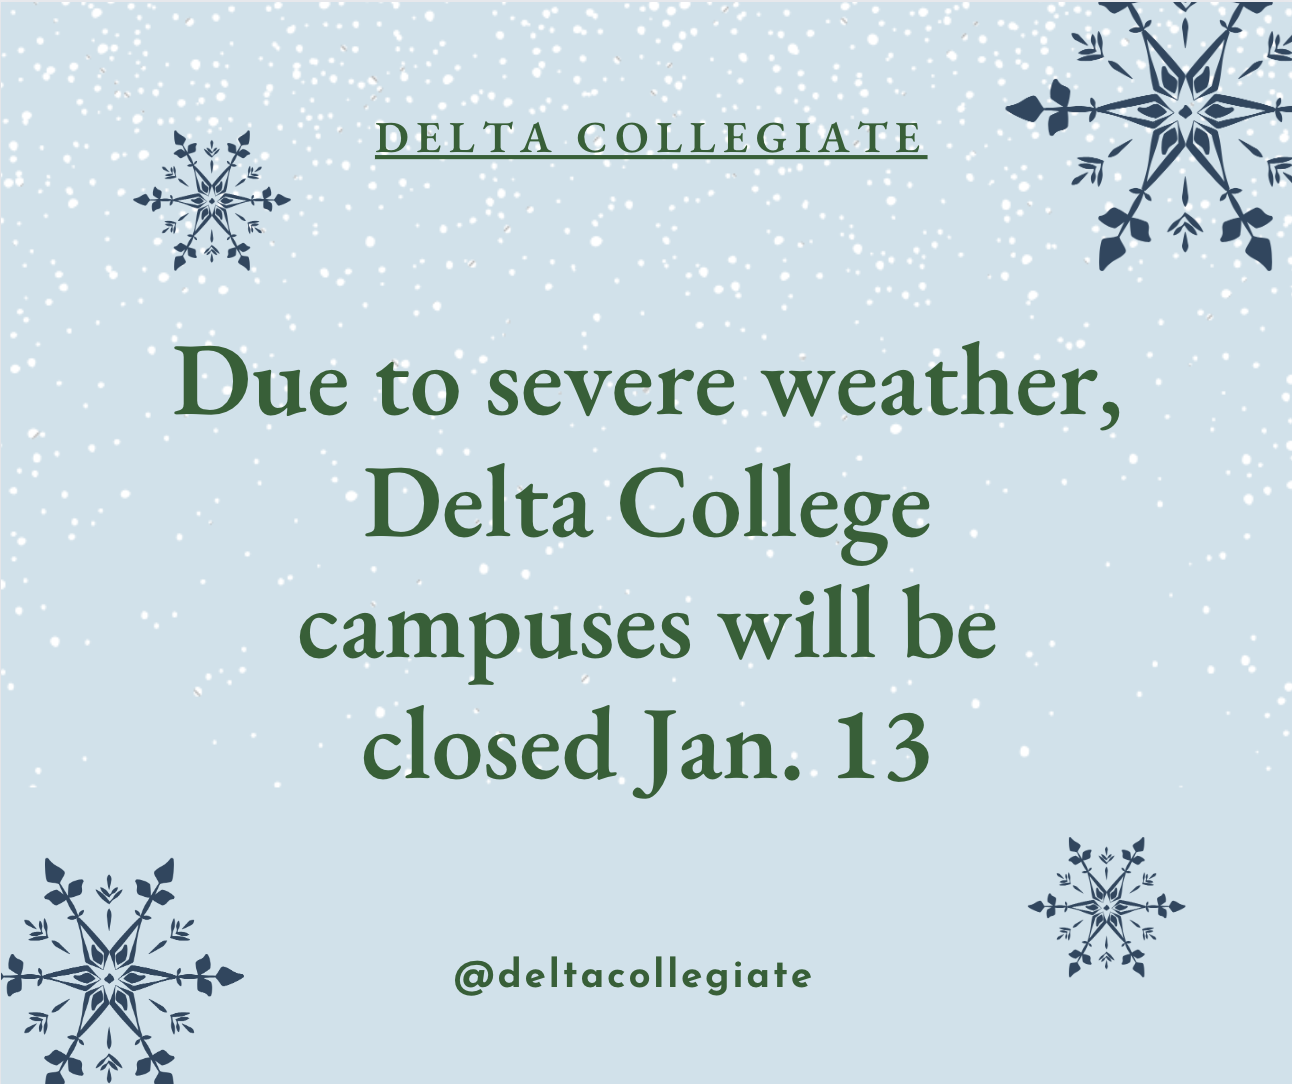 Severe weather causes campus closings